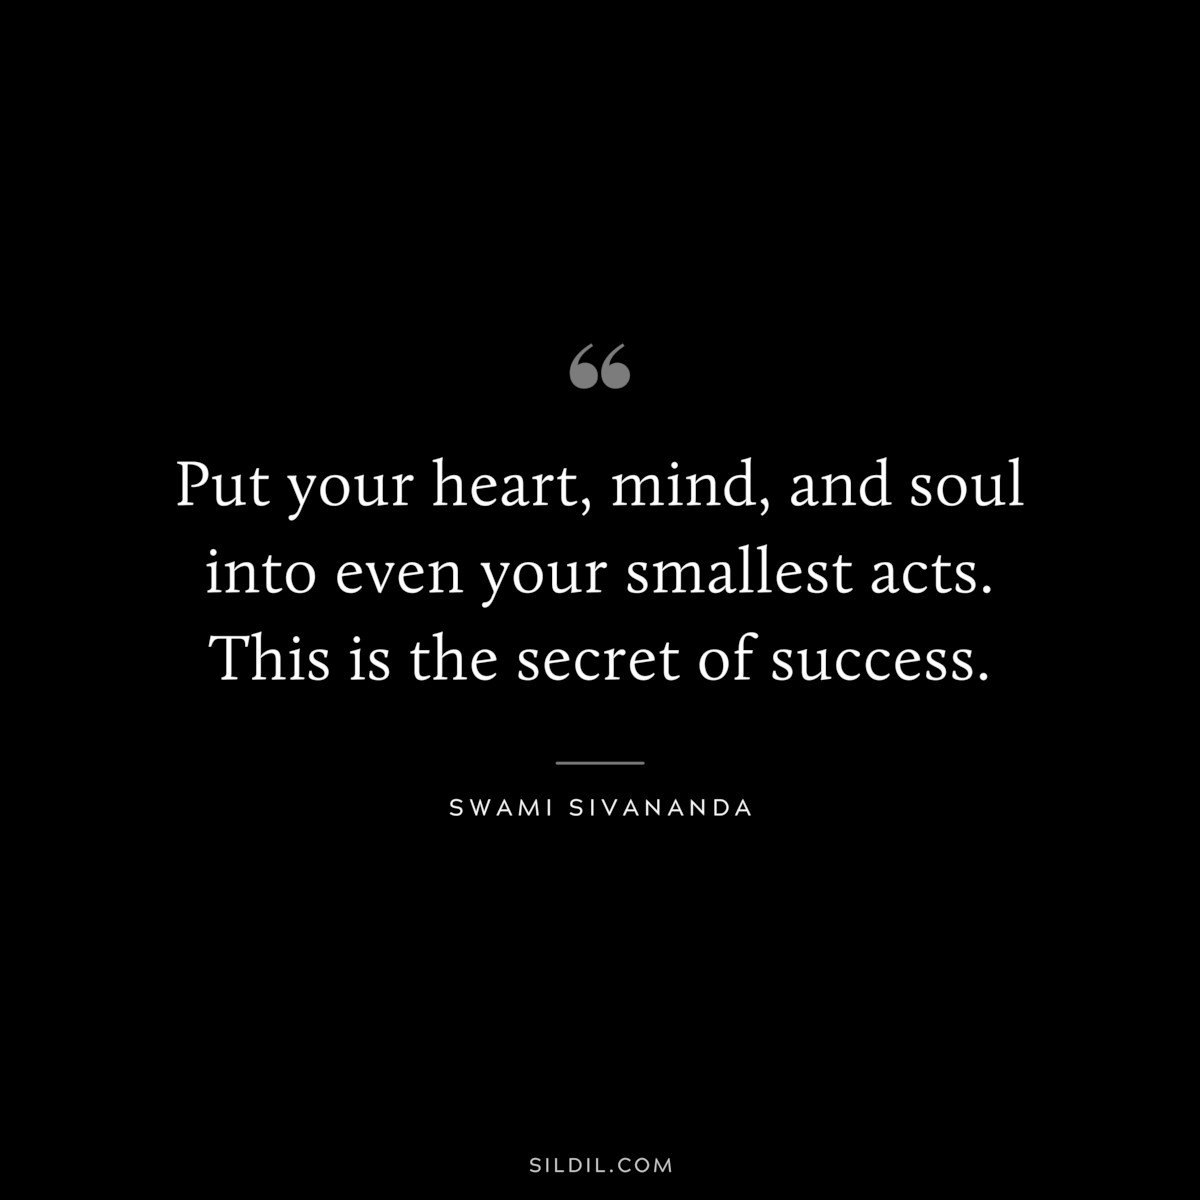 Put your heart, mind, and soul into even your smallest acts. This is the secret of success. ― Swami Sivananda